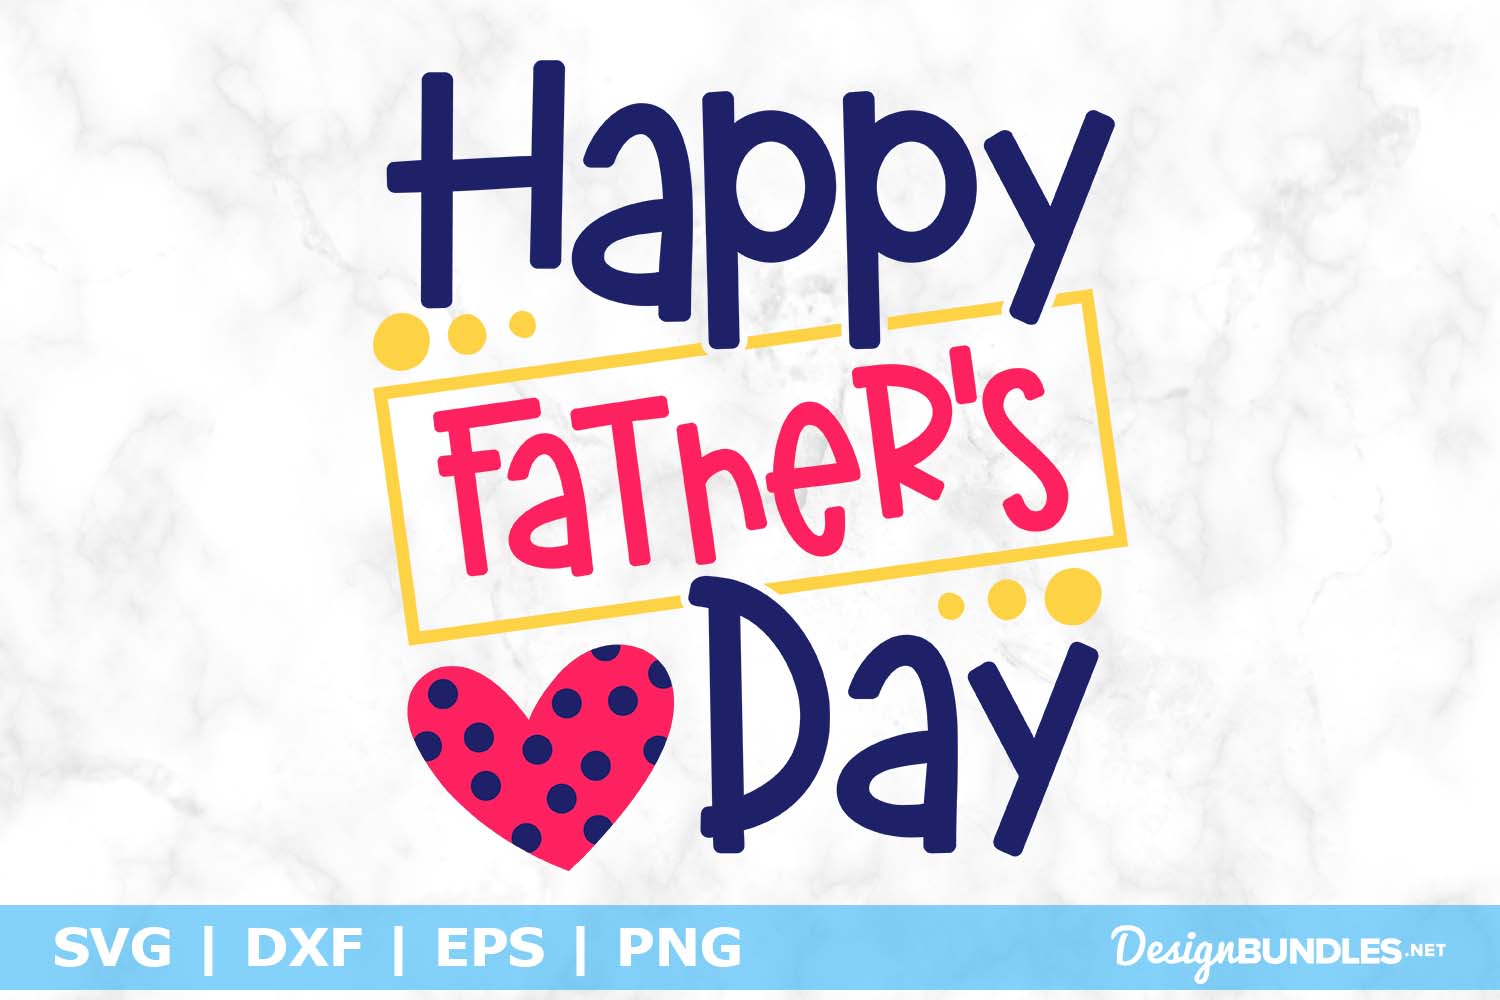 Download Happy Father's Day SVG File